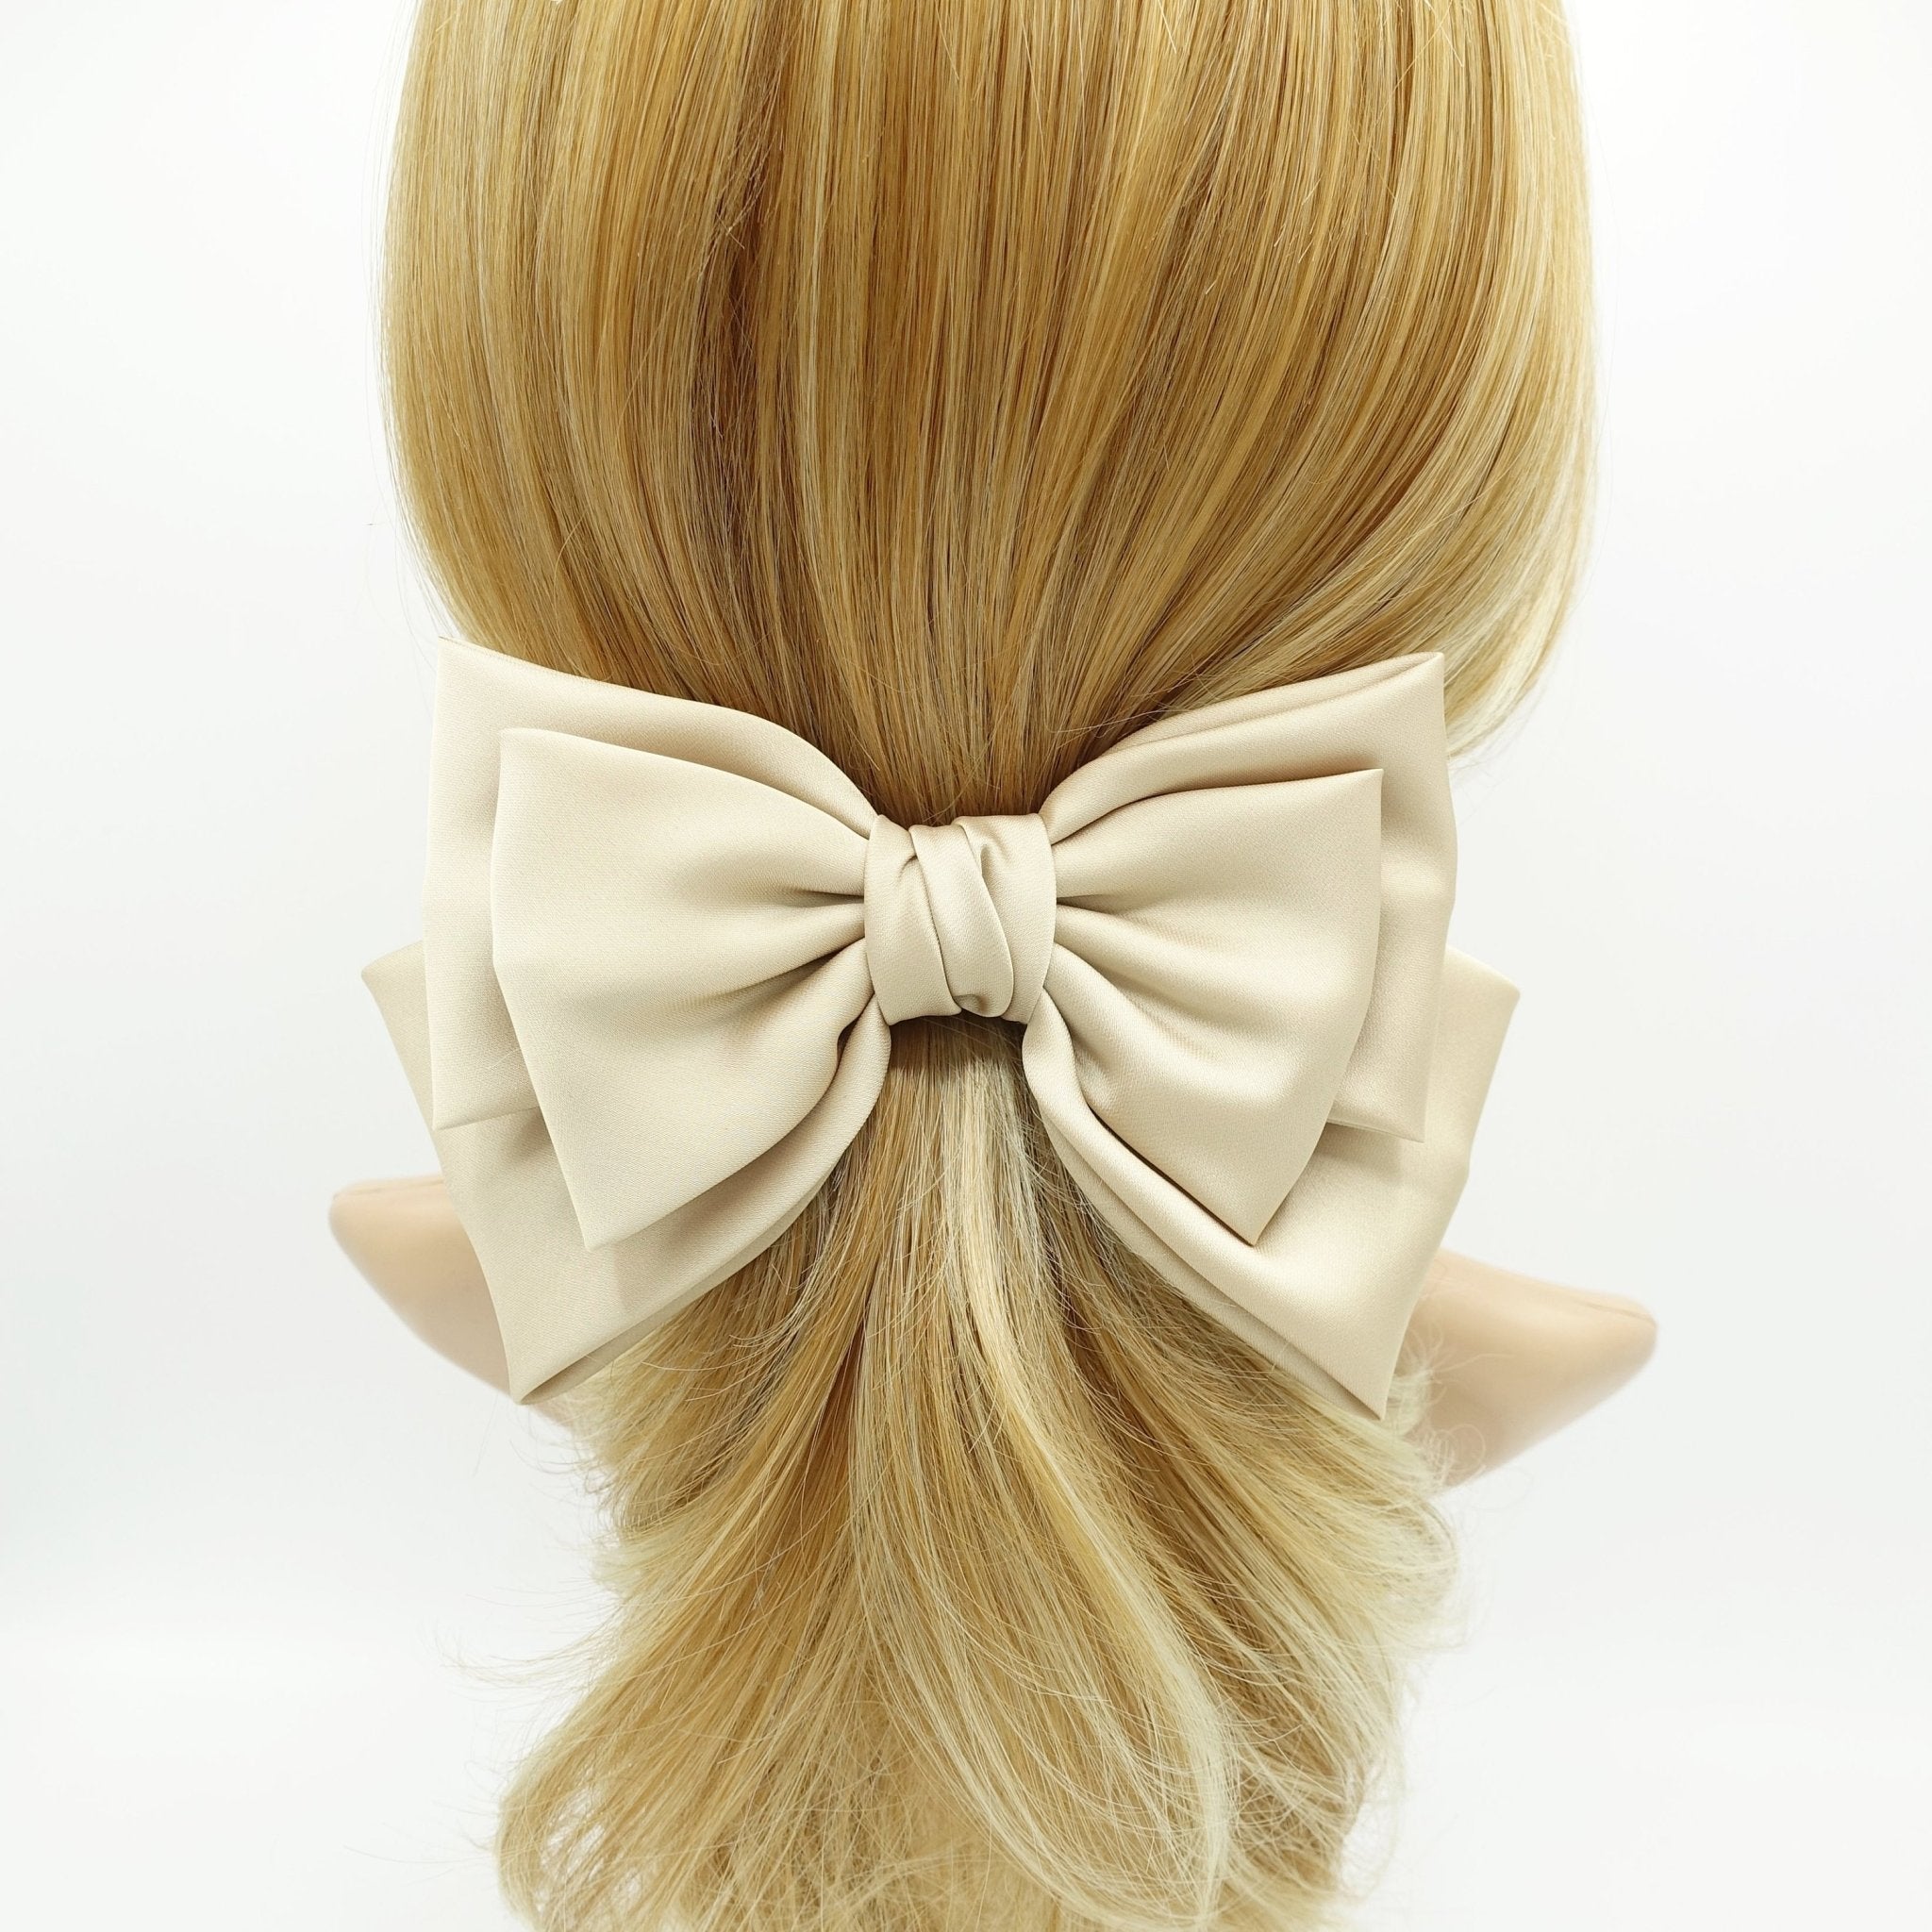 veryshine.com Barrettes & Clips Beige triple satin hair bow moderate style hair accessory for women